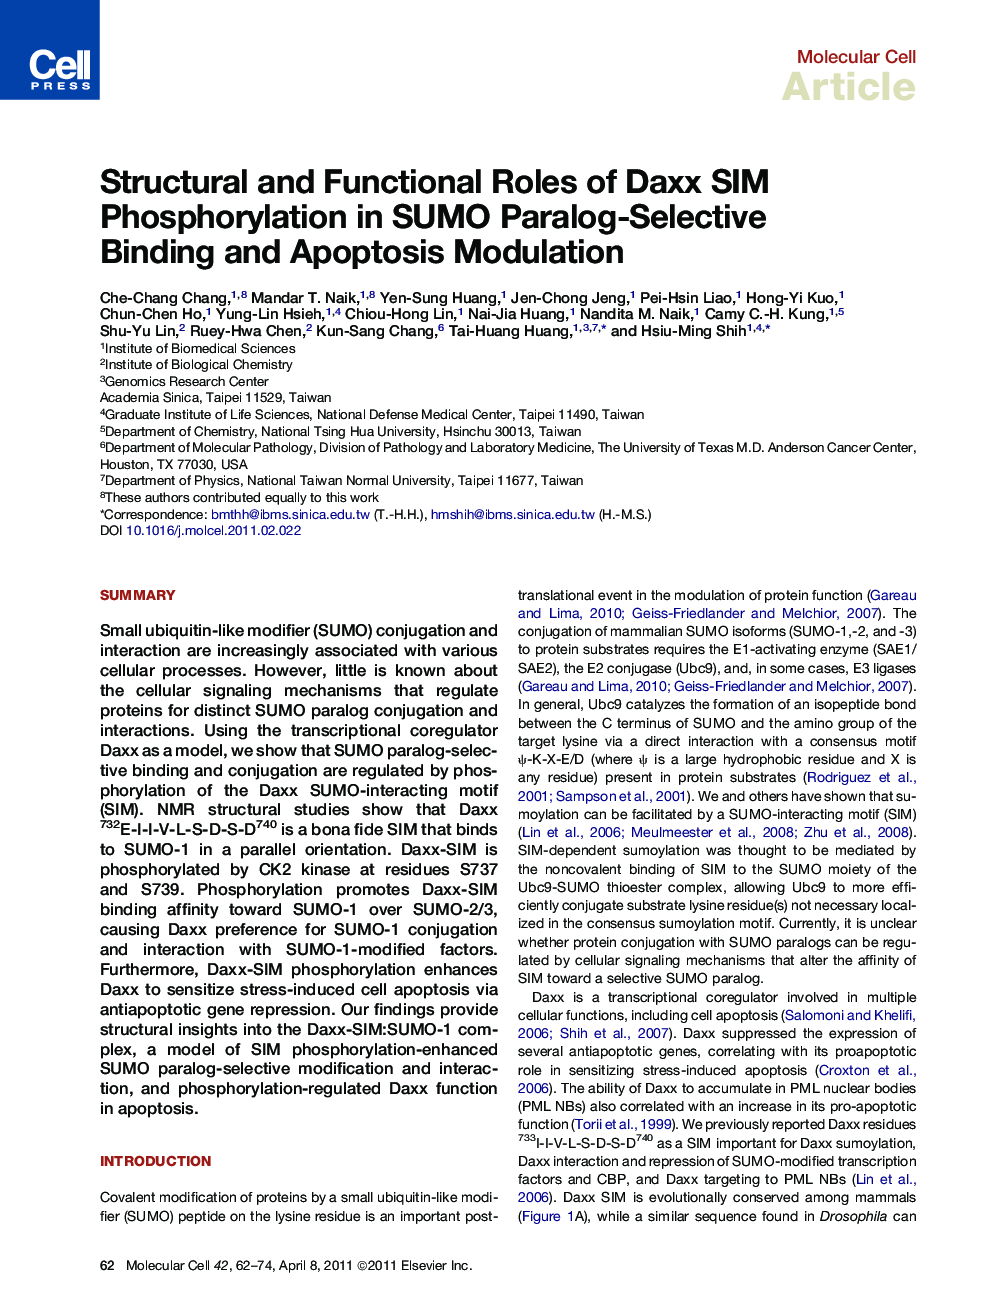 Structural and Functional Roles of Daxx SIM Phosphorylation in SUMO Paralog-Selective Binding and Apoptosis Modulation